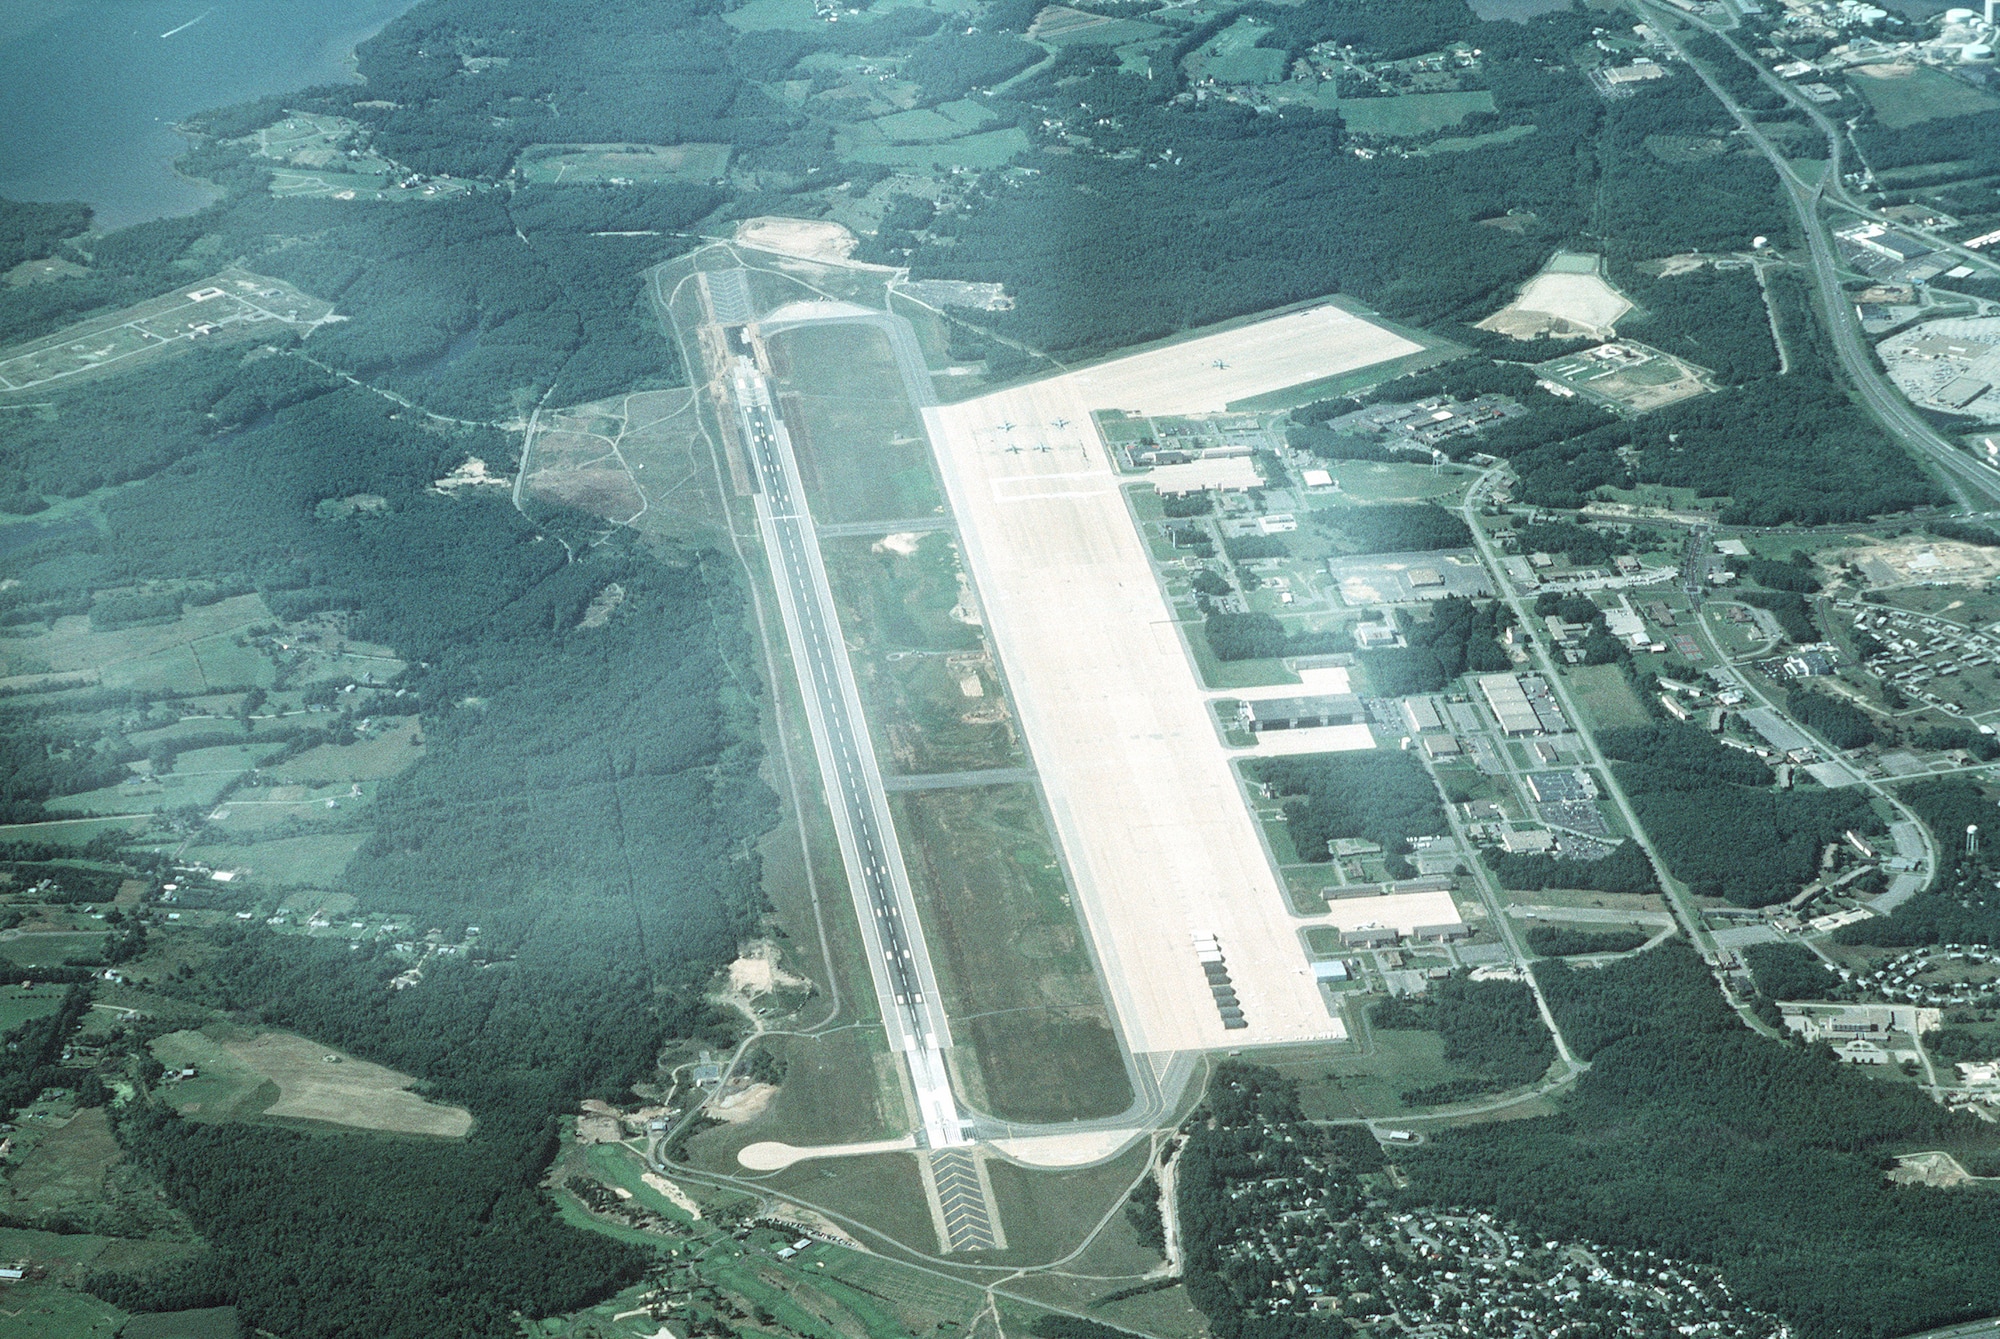 High oblique aerial view, looking north of Pease Air National Guard Base, formerly Pease Air Force Base, N.H. This joint use civil and military airfield is home to the 157th Air Refueling Group flying KC-135R Stratotankers for the New Hampshire Air National Guard.